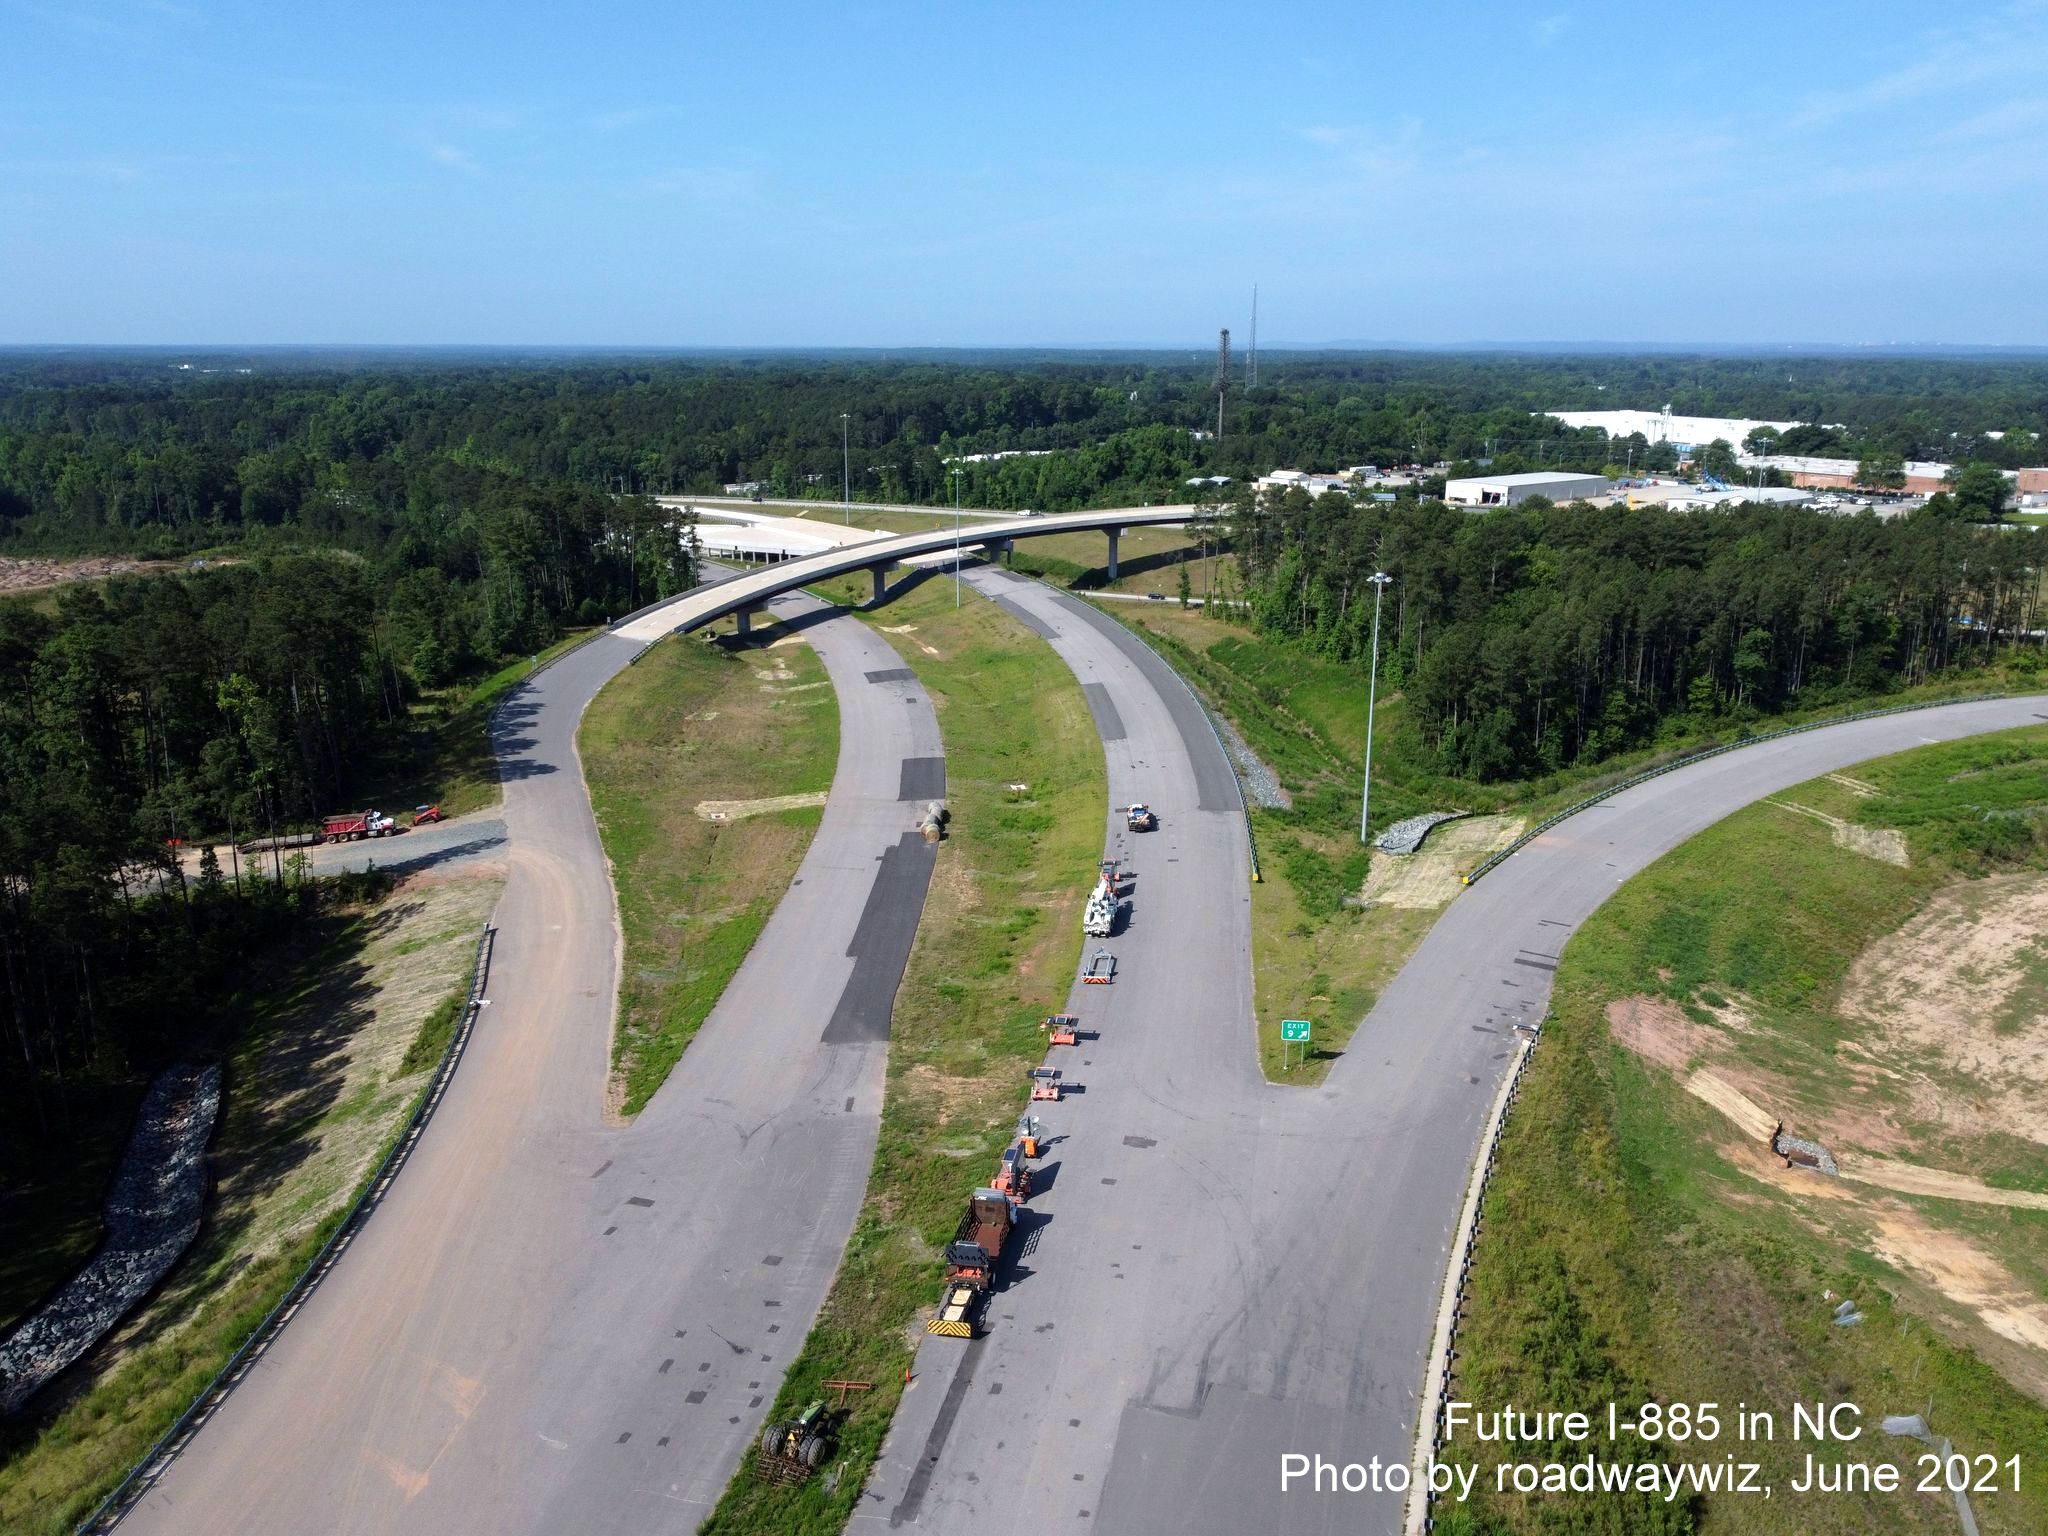 Image taken looking closely at the unopened I-885/East End Connector NC 147 interchange in Durham, by roadwaywiz, June 2021